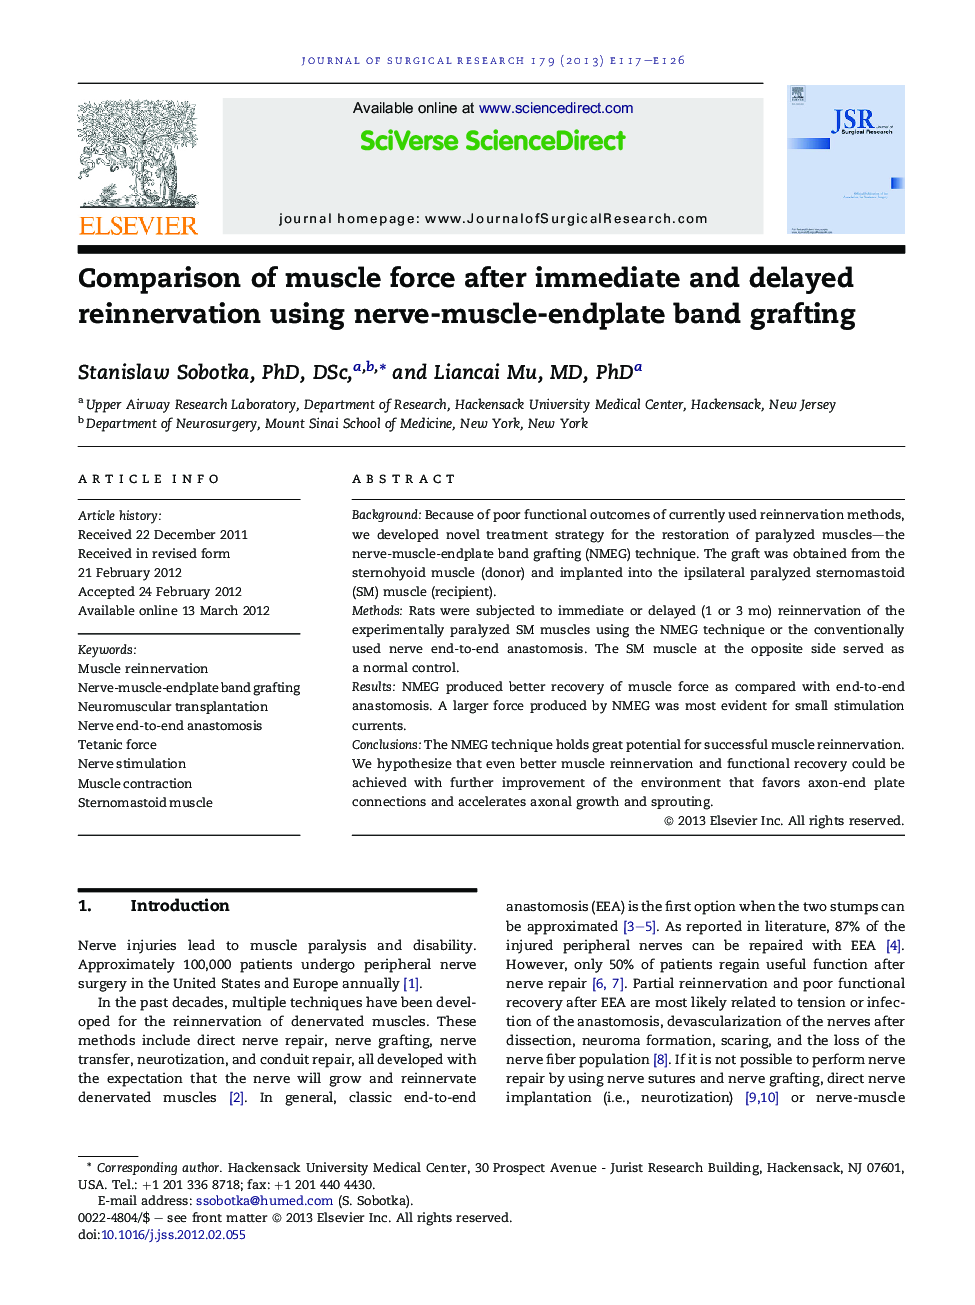 Comparison of muscle force after immediate and delayed reinnervation using nerve-muscle-endplate band grafting